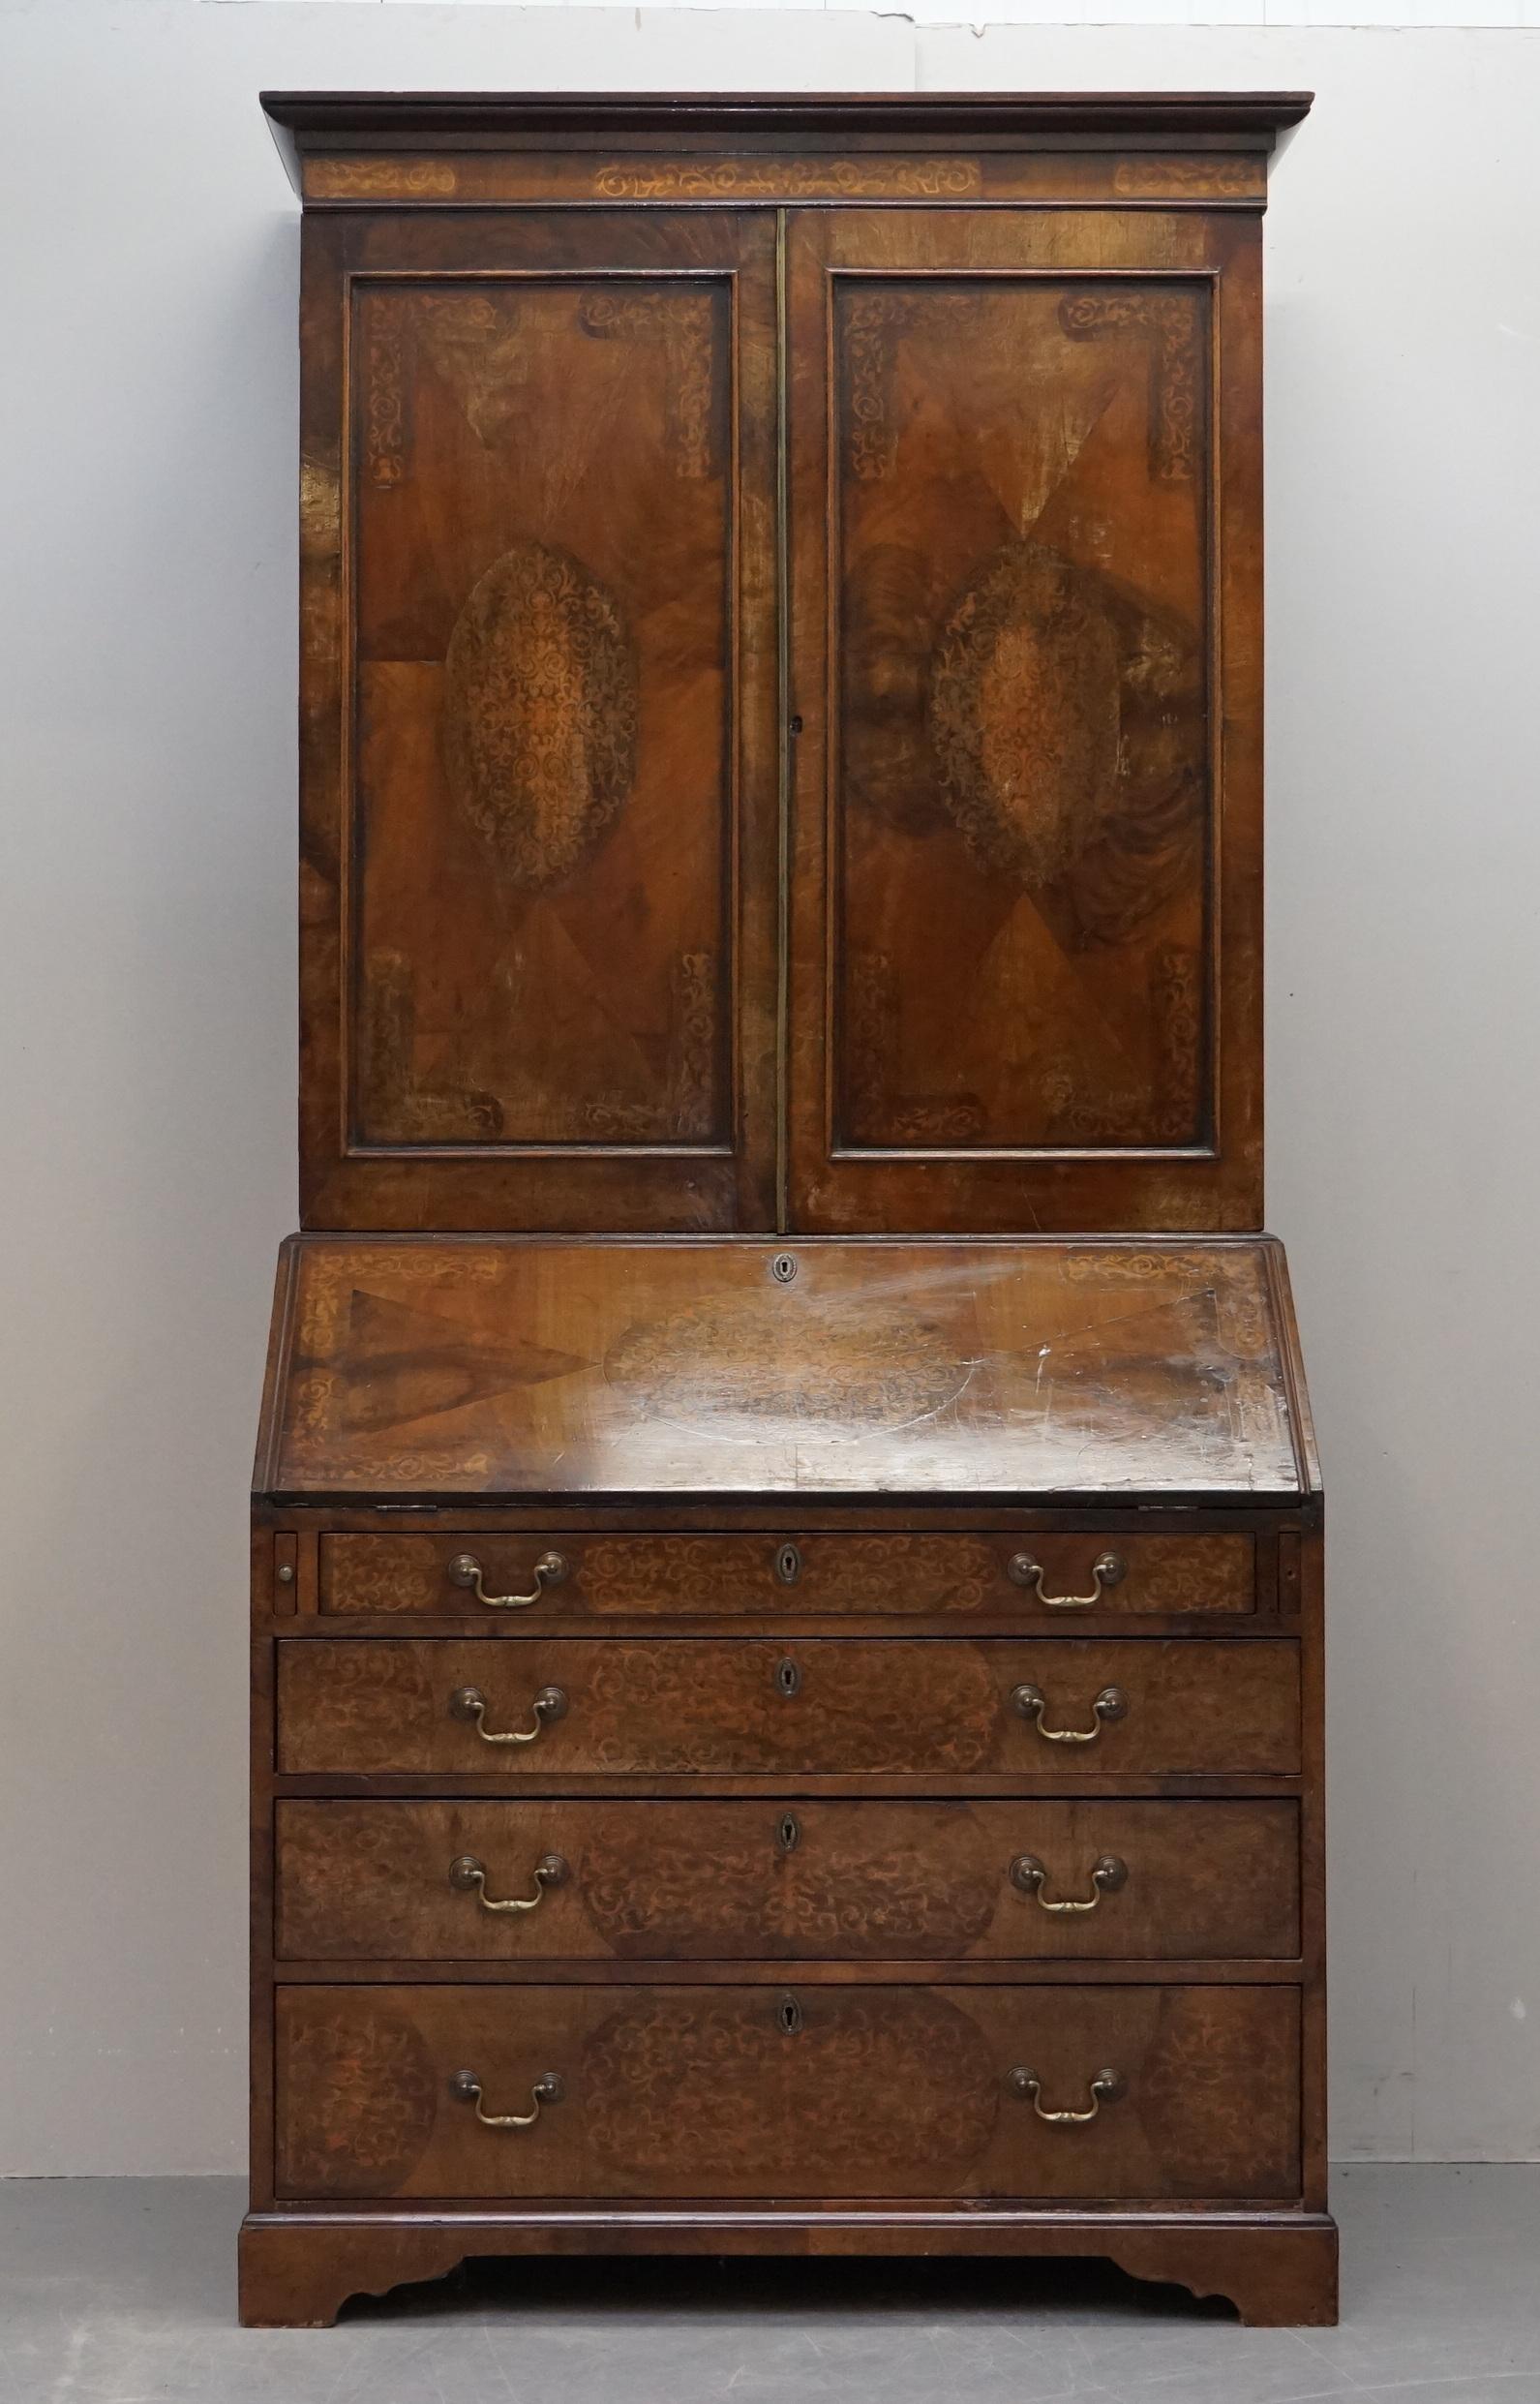 We are delighted to offer for sale this very nice hand made in England George III circa 1760-1780 Walnut & Seaweed Marquetry inlaid Bureau Library Bookcase

An extremely decorative and very fine antique. The timber patina is to die for, this